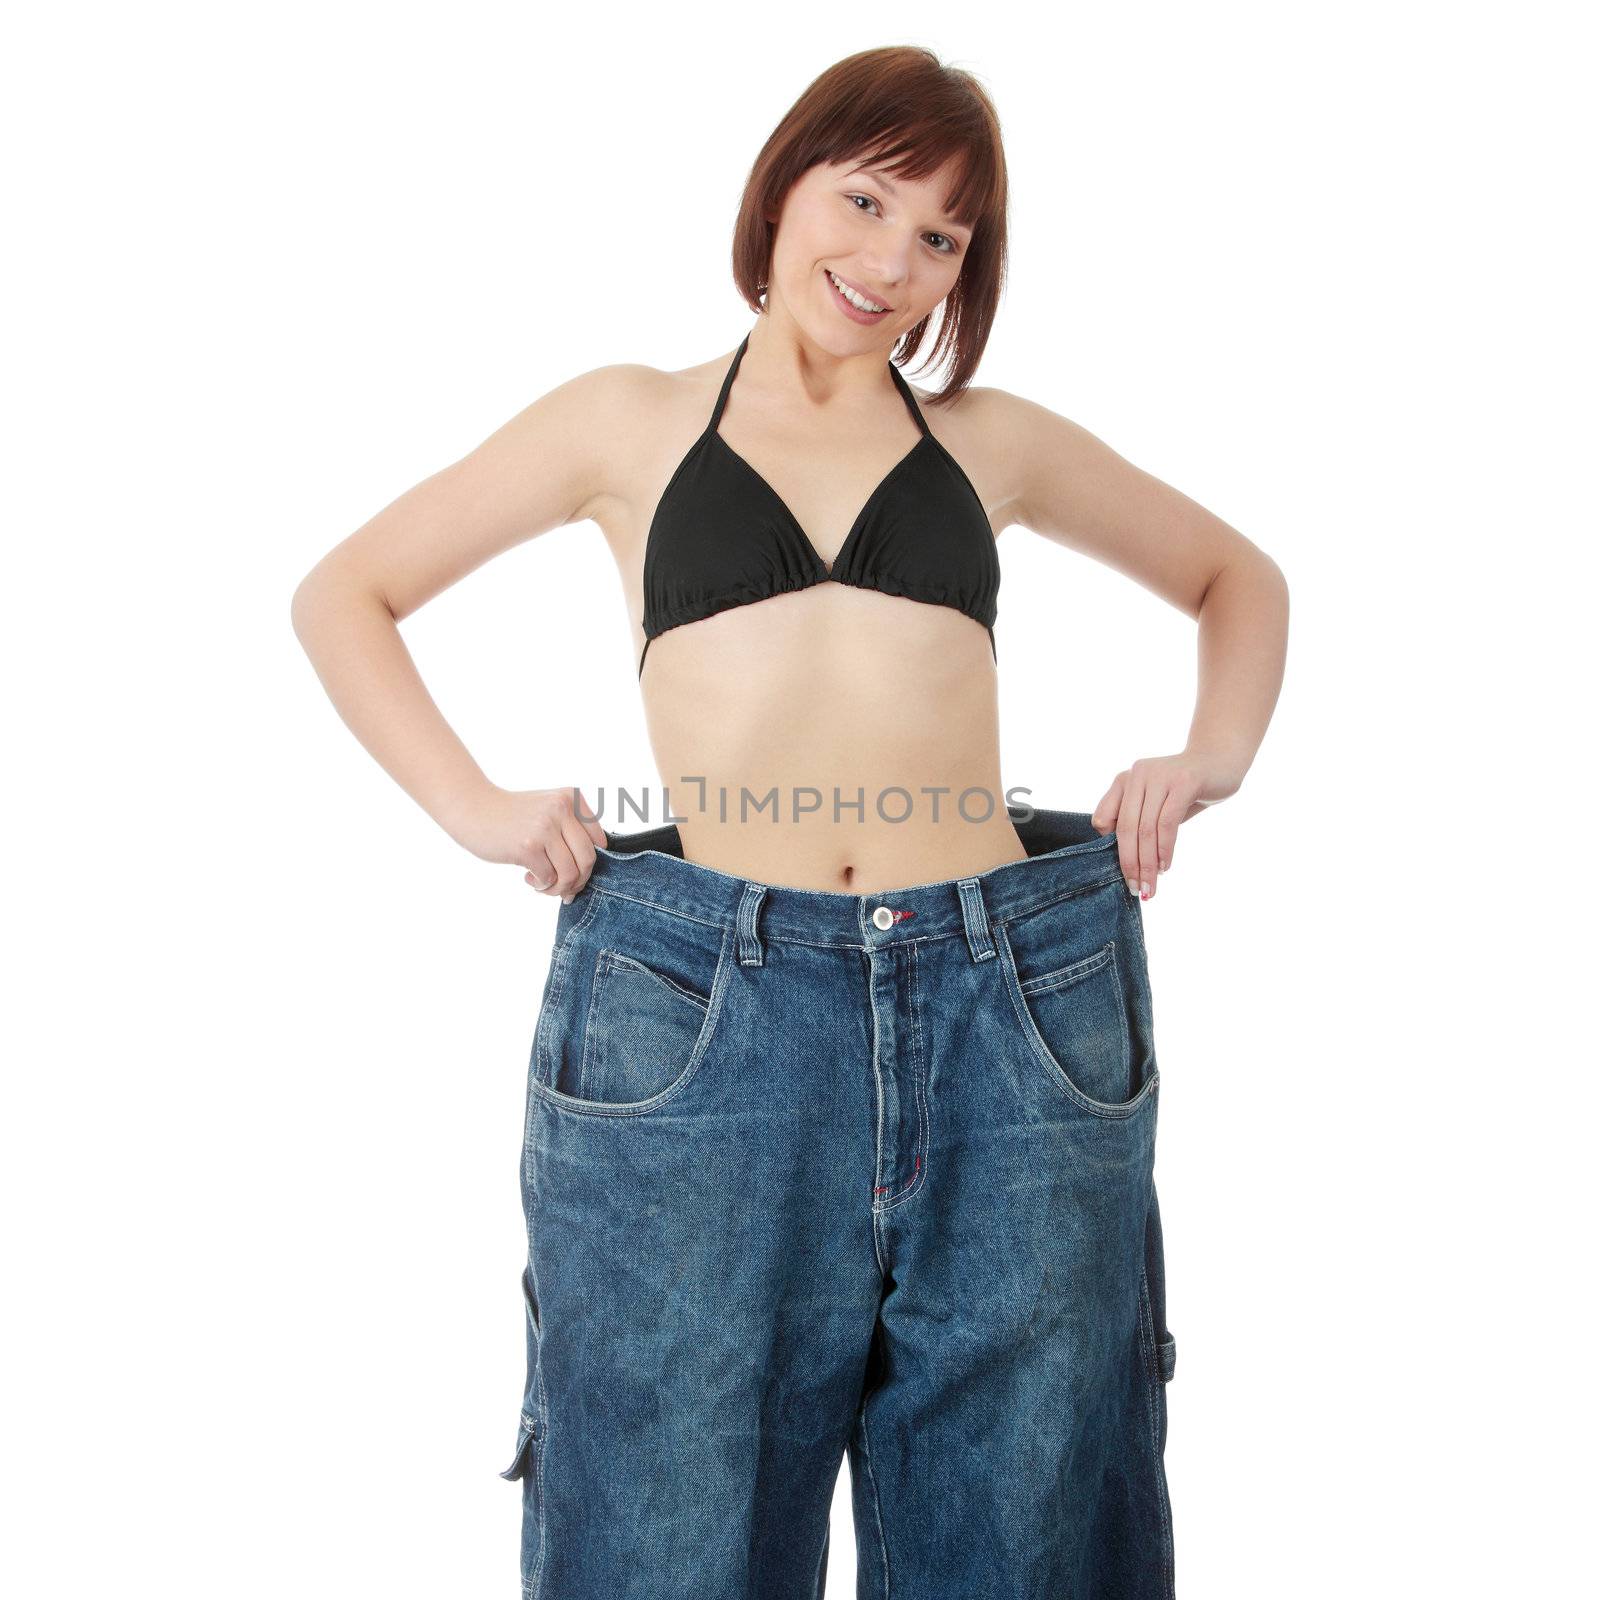 Teen woman showing how much weight she lost by BDS